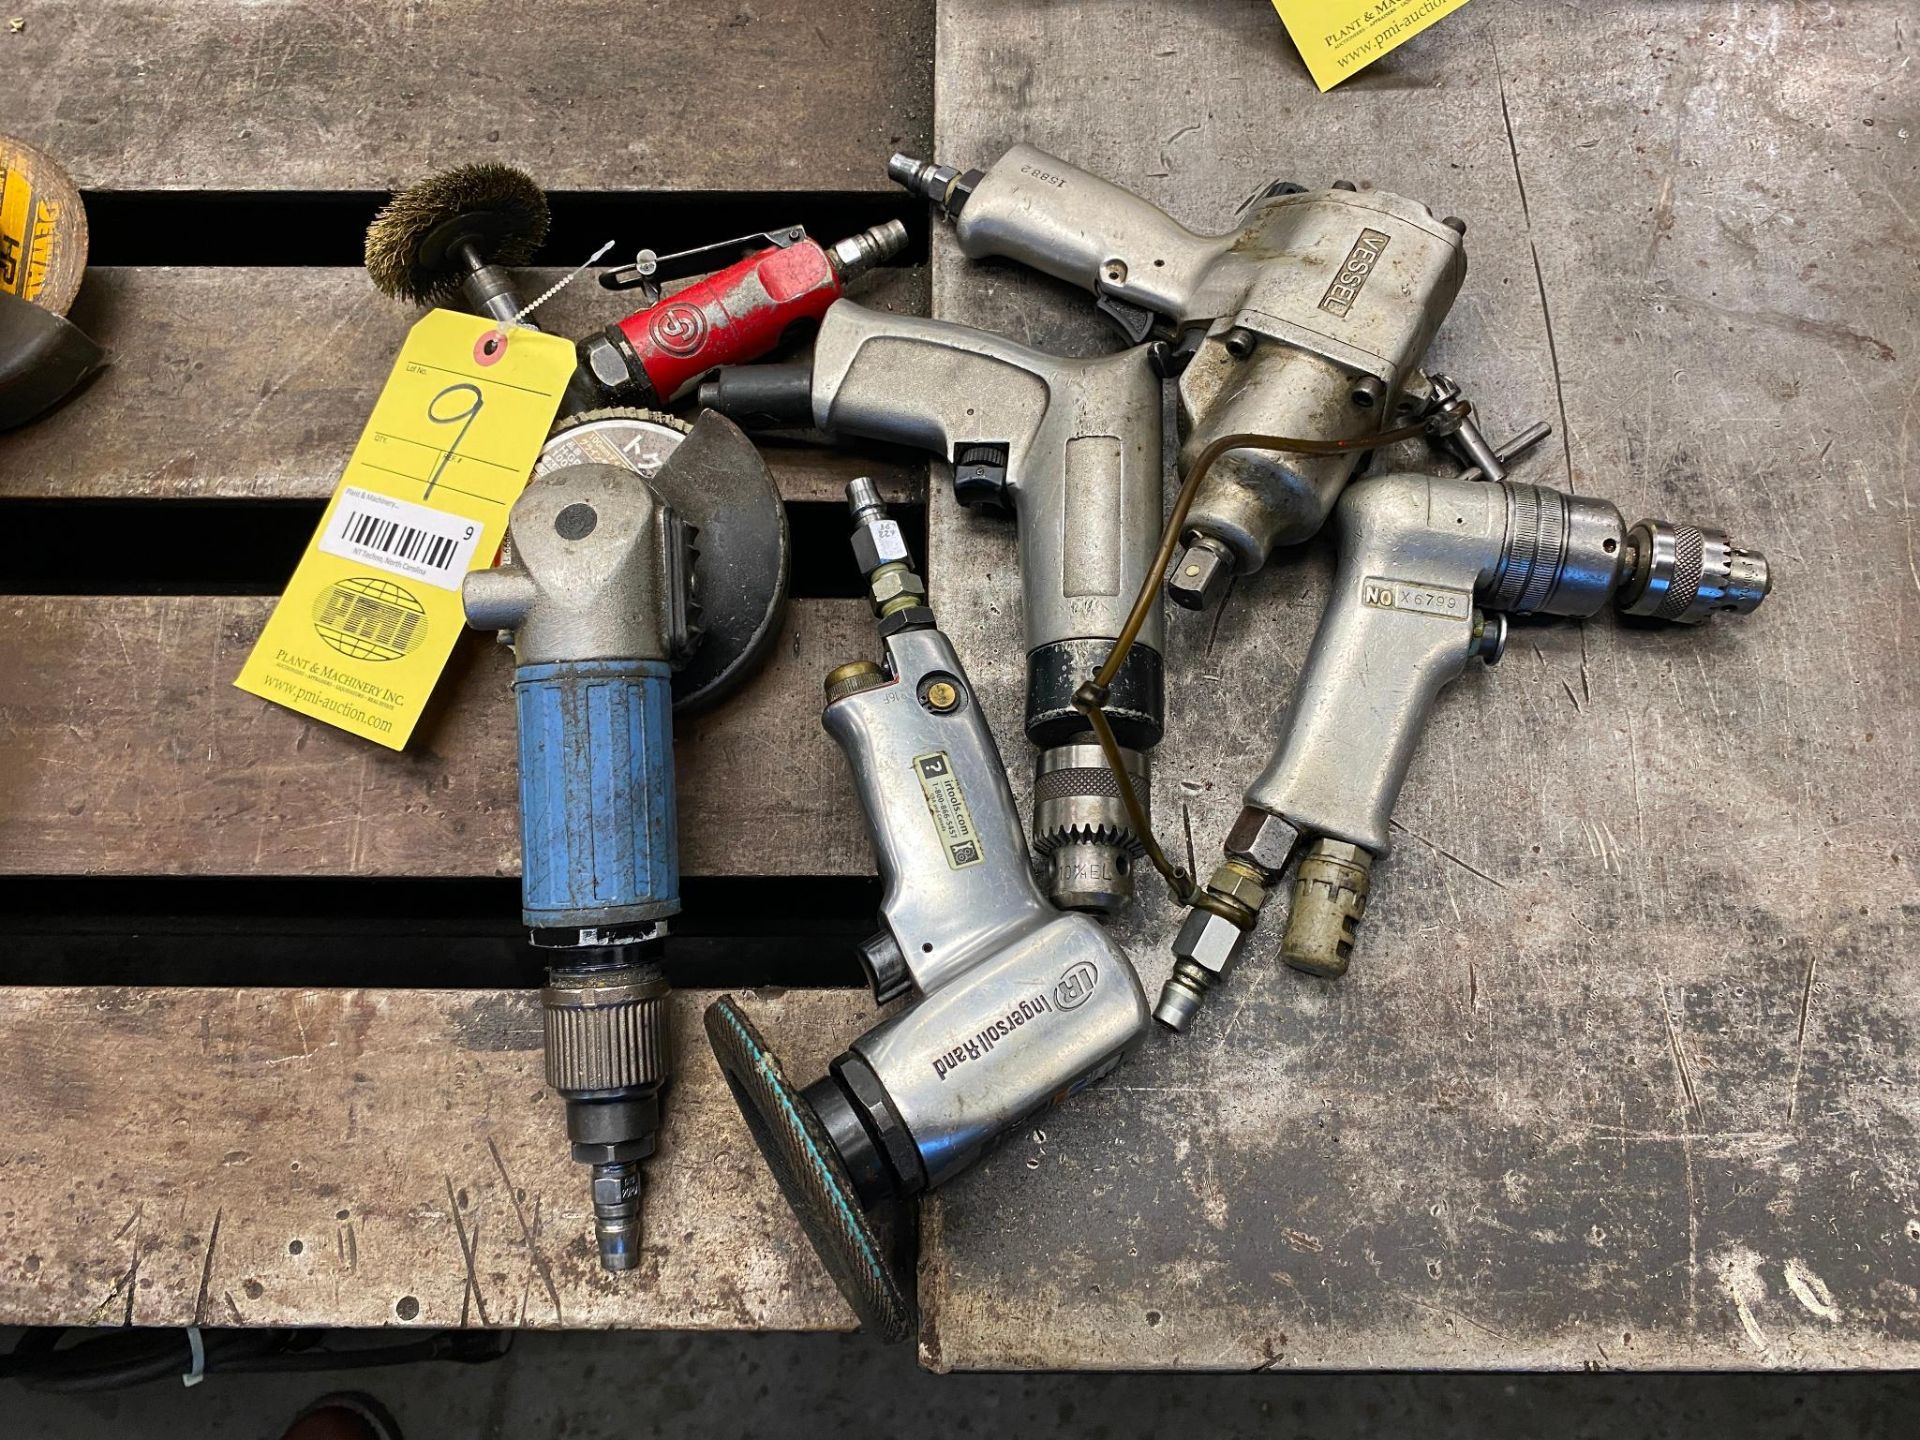 LOT CONSISTING OF: approx. (5) pneumatic tools, grinders, impact wrench & right angle drill